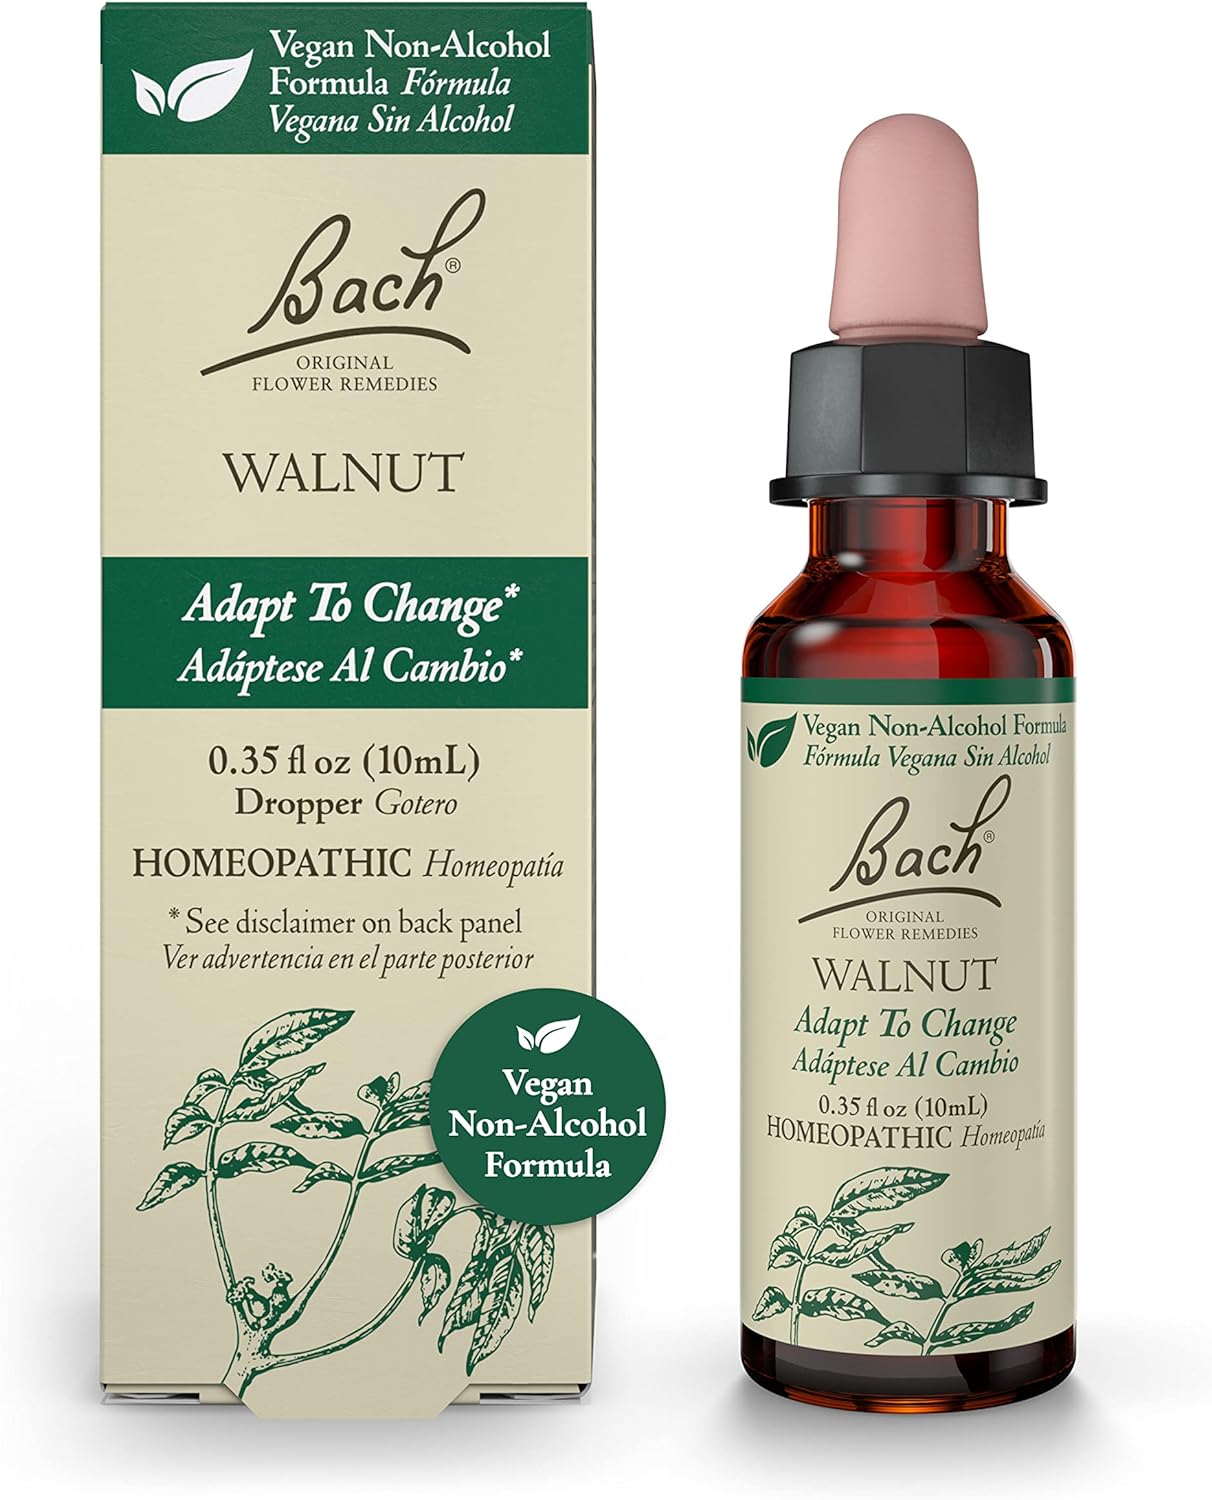 Bach Original Flower Remedies, Walnut for Adapting to Change (Non-Alcohol Formula), Natural Homeopathic Flower Essence, Holistic Wellness and Stress Relief, Vegan, 10mL Dropper, Clear